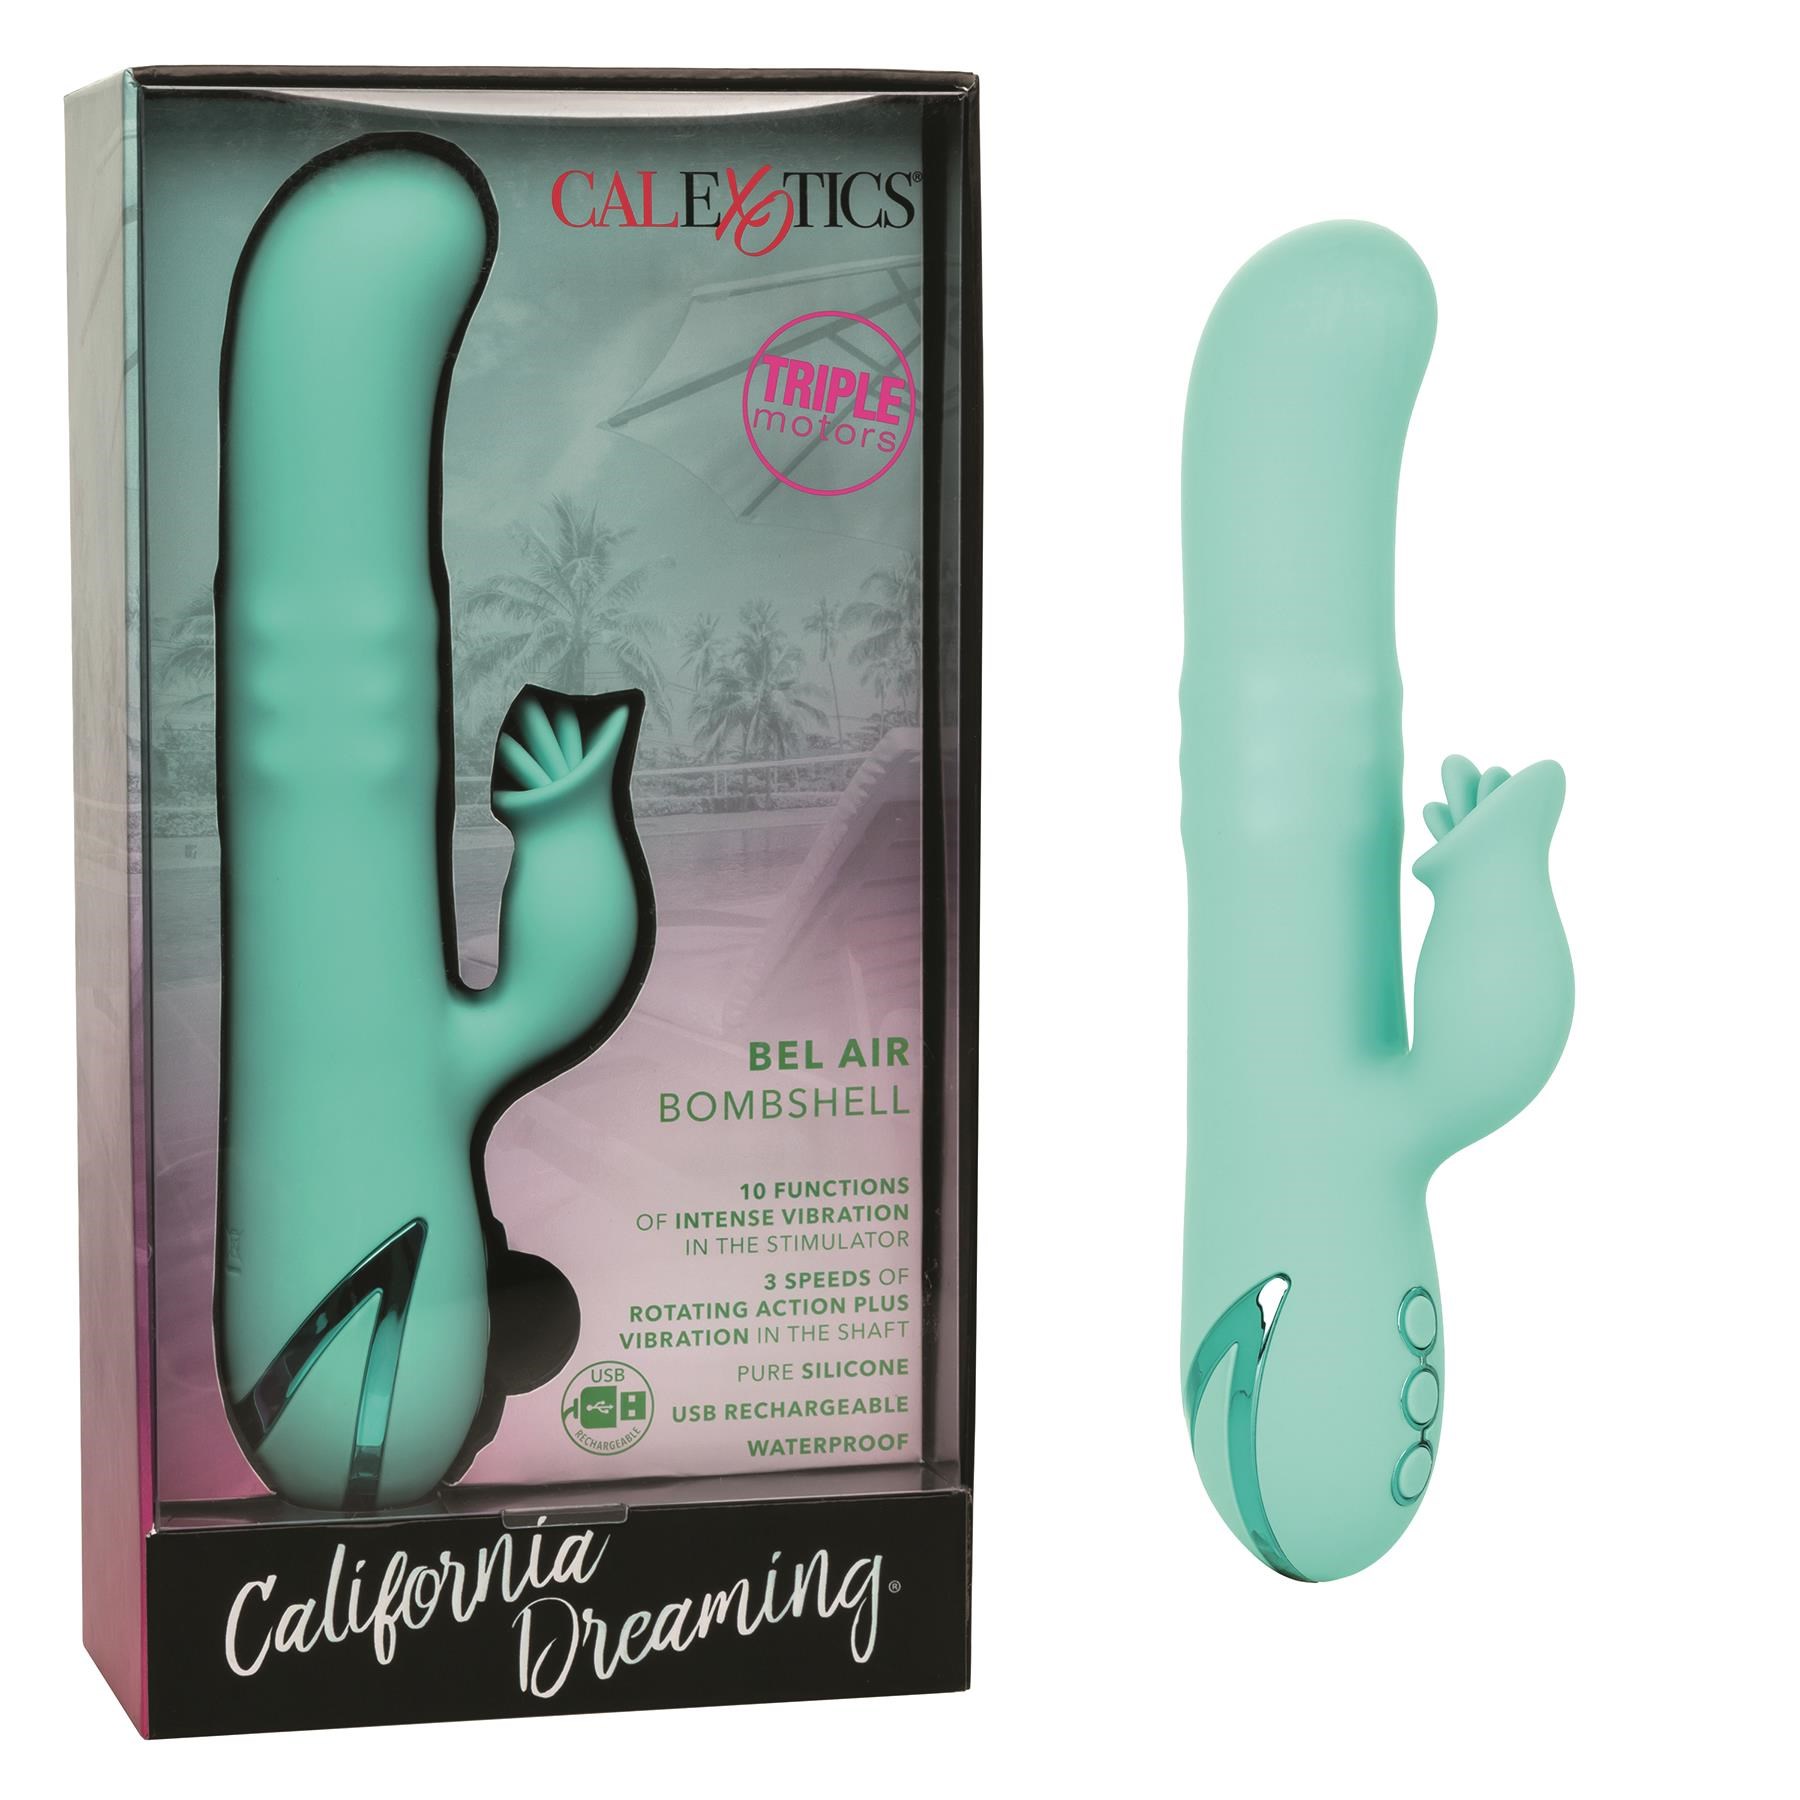 California Dreaming Bel Air Bombshell Dual Stimulator - Product and Packaging